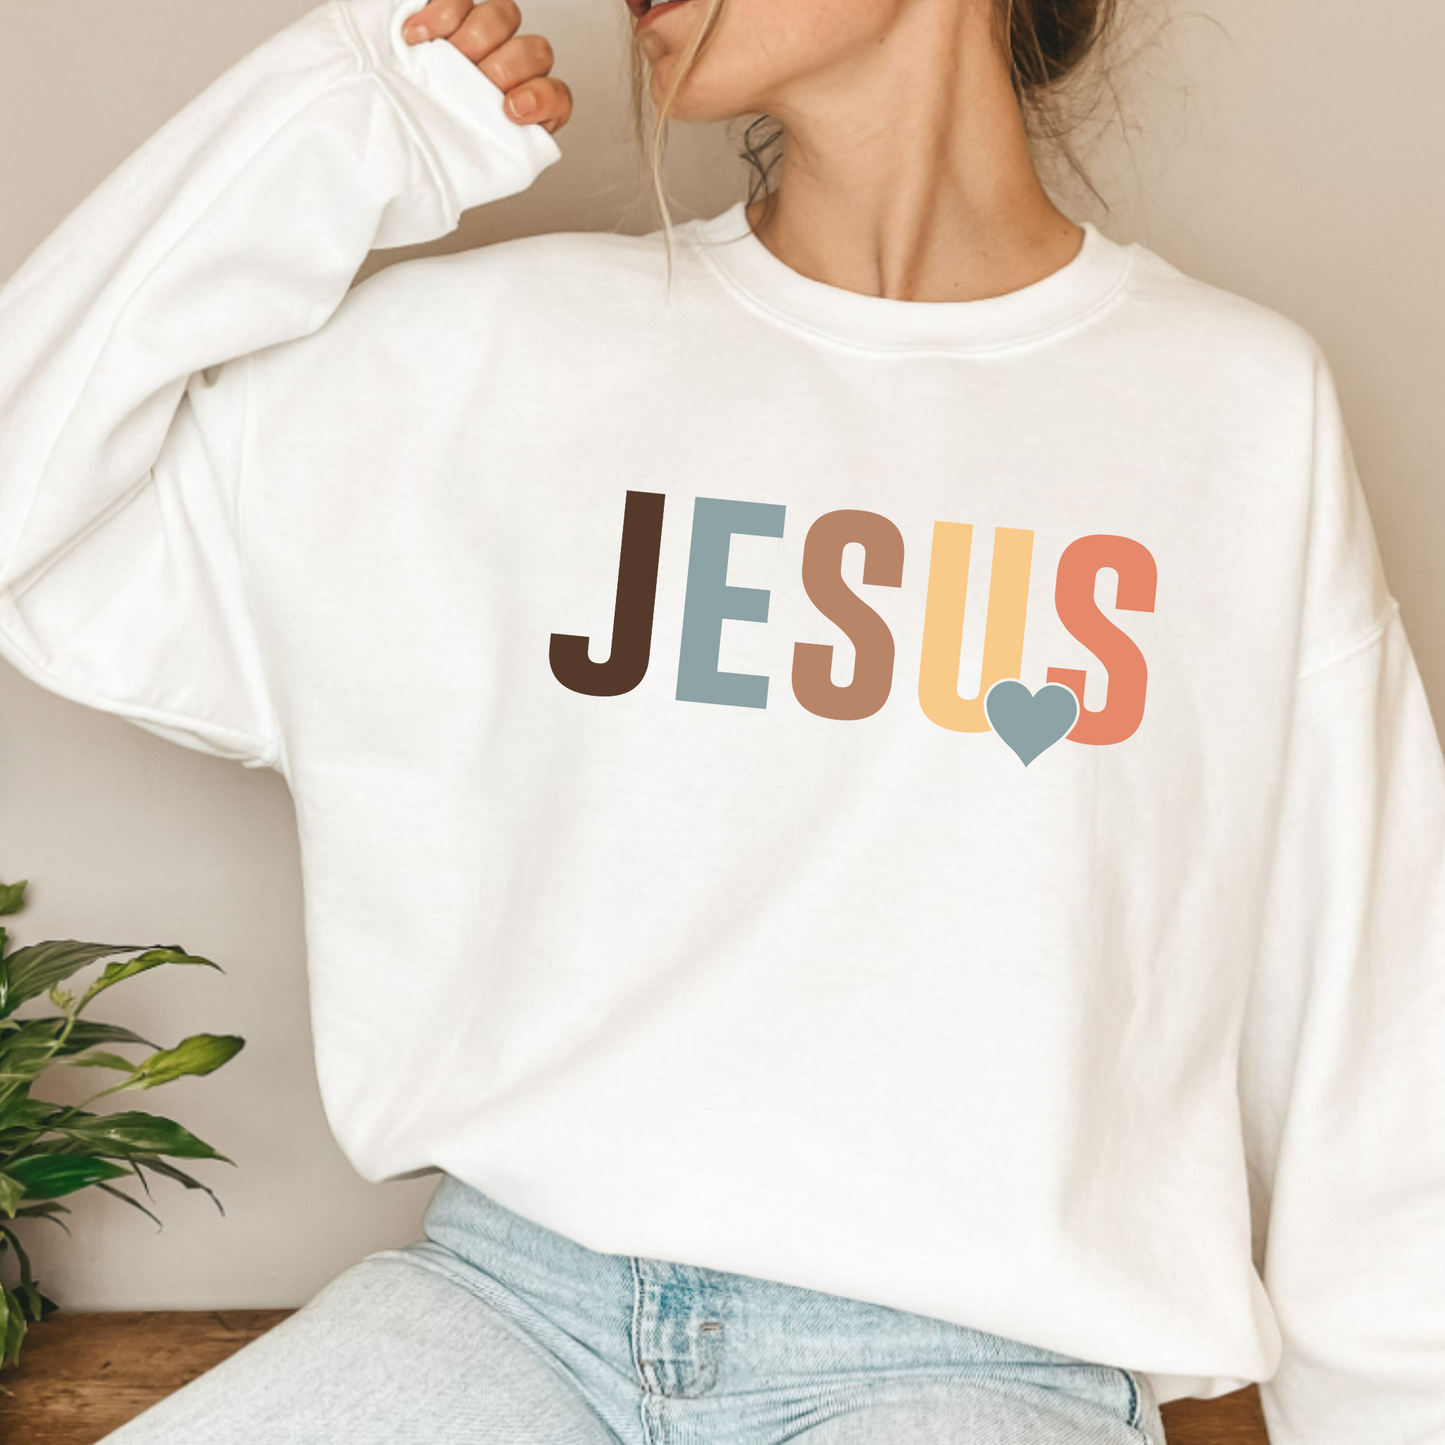 (Shirt not included) JESUS - Clear Film Transfer